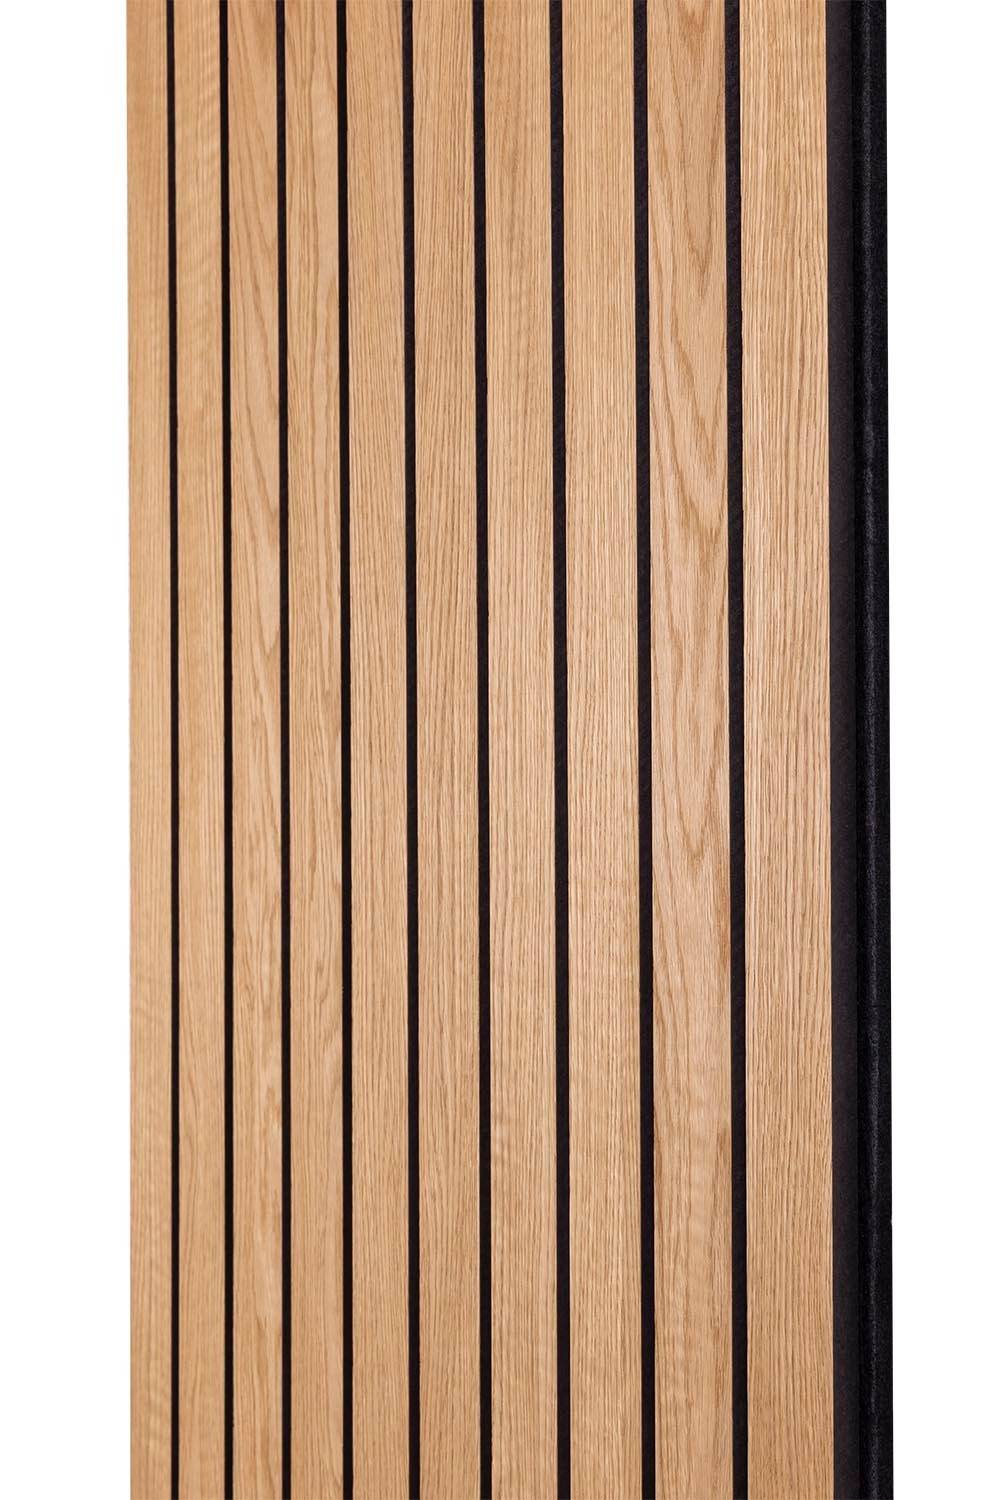 https://cld.accentuate.io/44050042388725/1695742467058/naturewall_slatwall_grand_natural_oak_oiled_product_1.jpg?v=1695742467058&options=w_1000,h_1500,c_crop